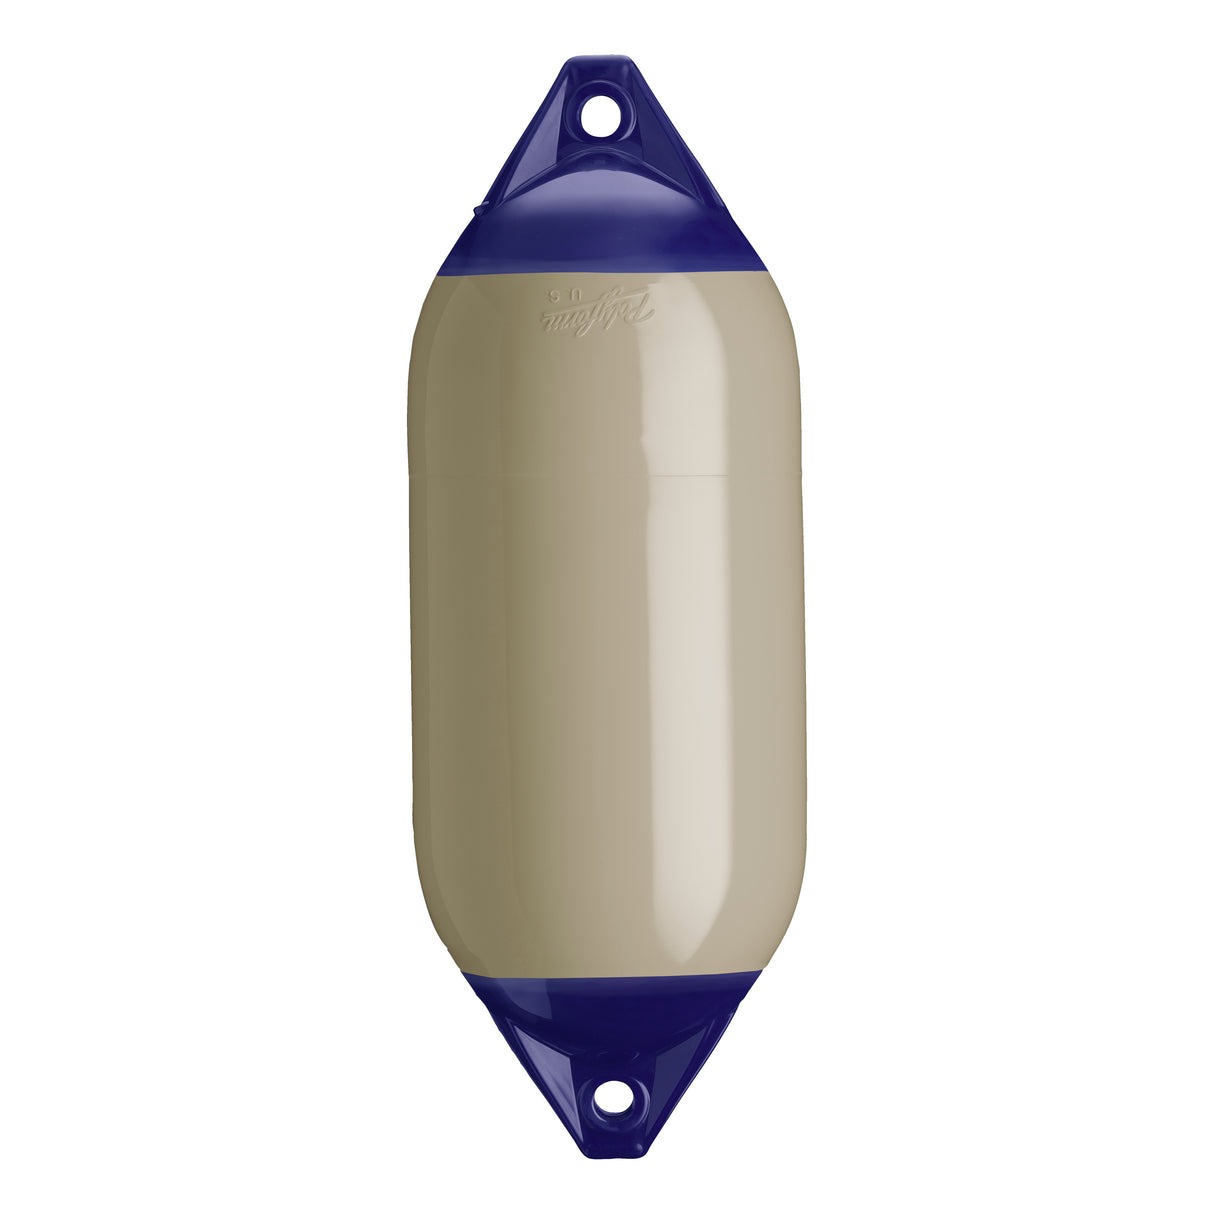 Sand boat fender with Navy-Top, Polyform F-5 